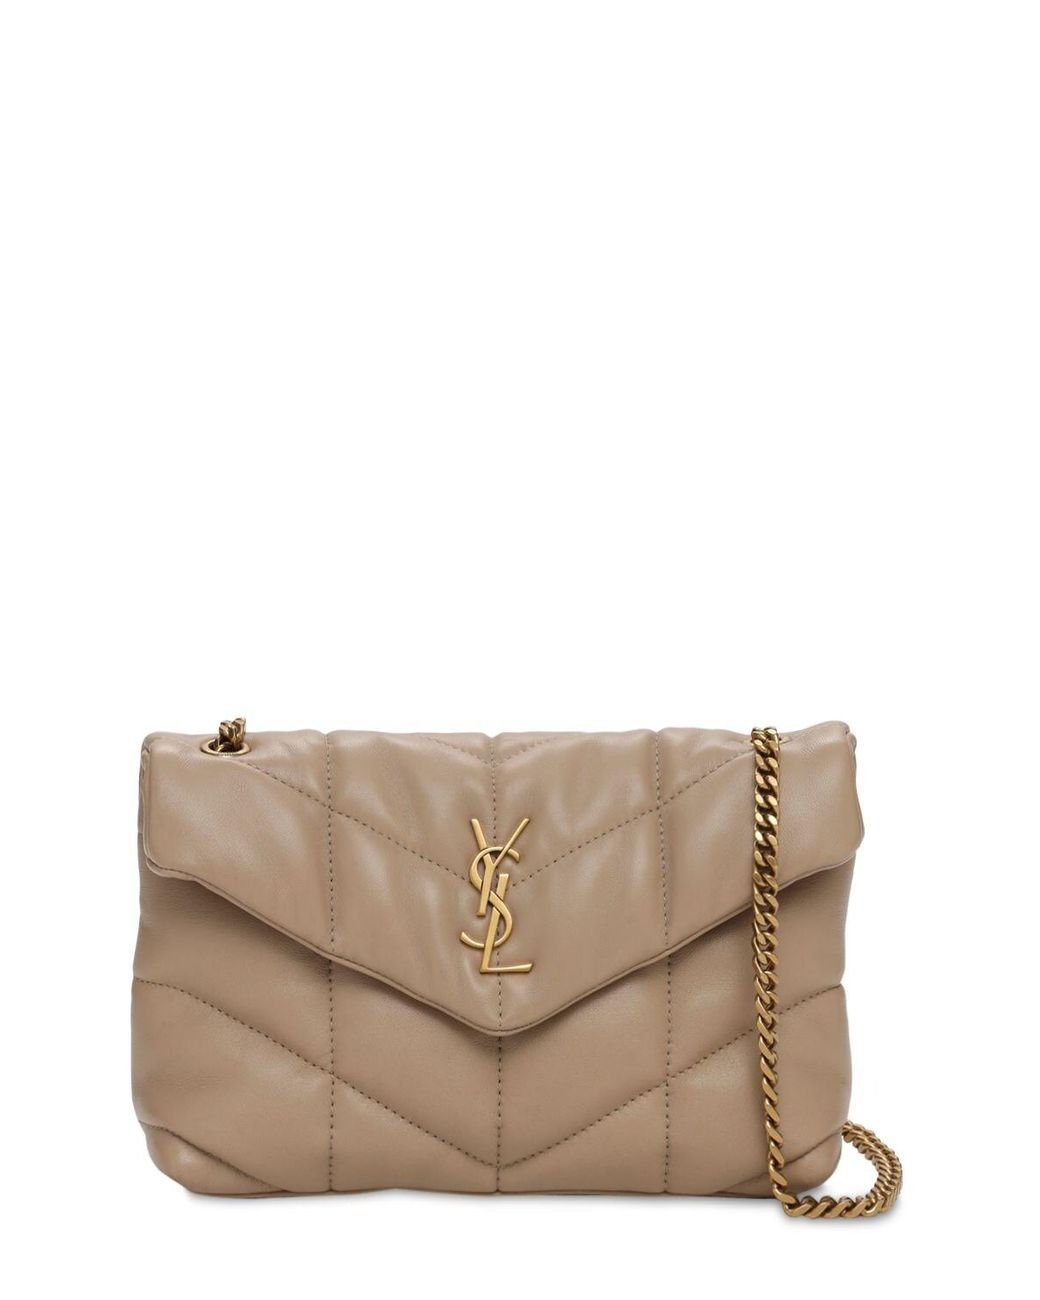 Saint Laurent Mini Puffer Loulou Leather Bag in Natural | Lyst